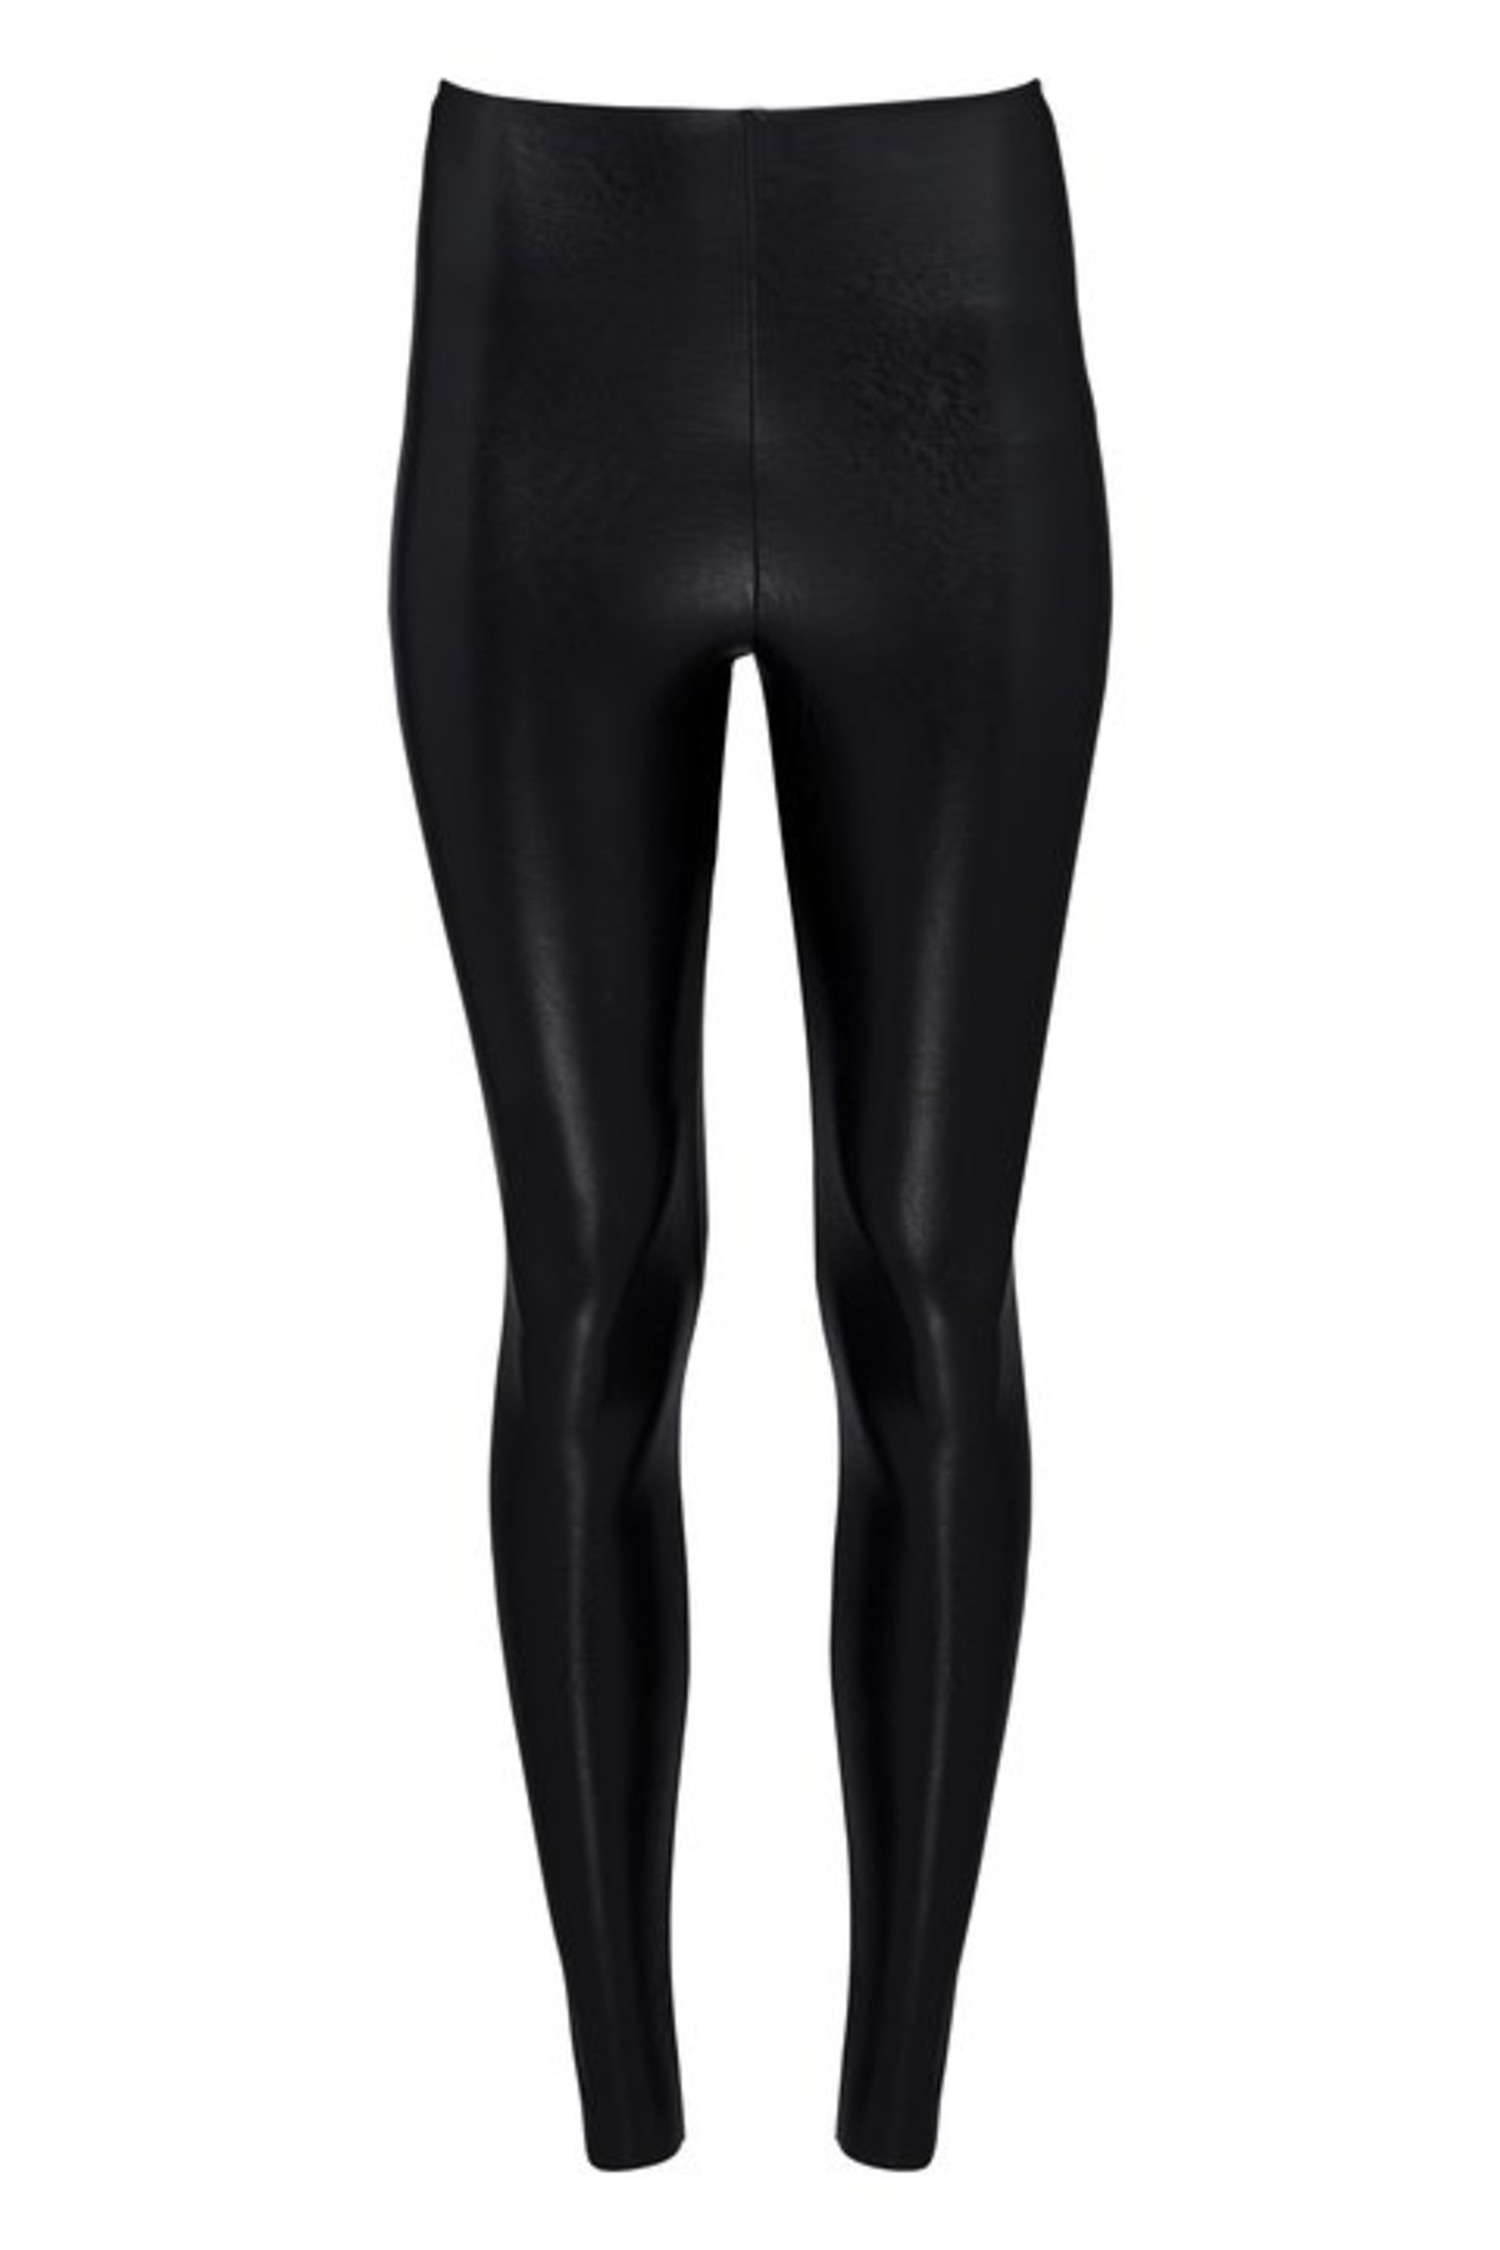 Women's Faux Leather High-Waist Leggings - A New Day™ Black